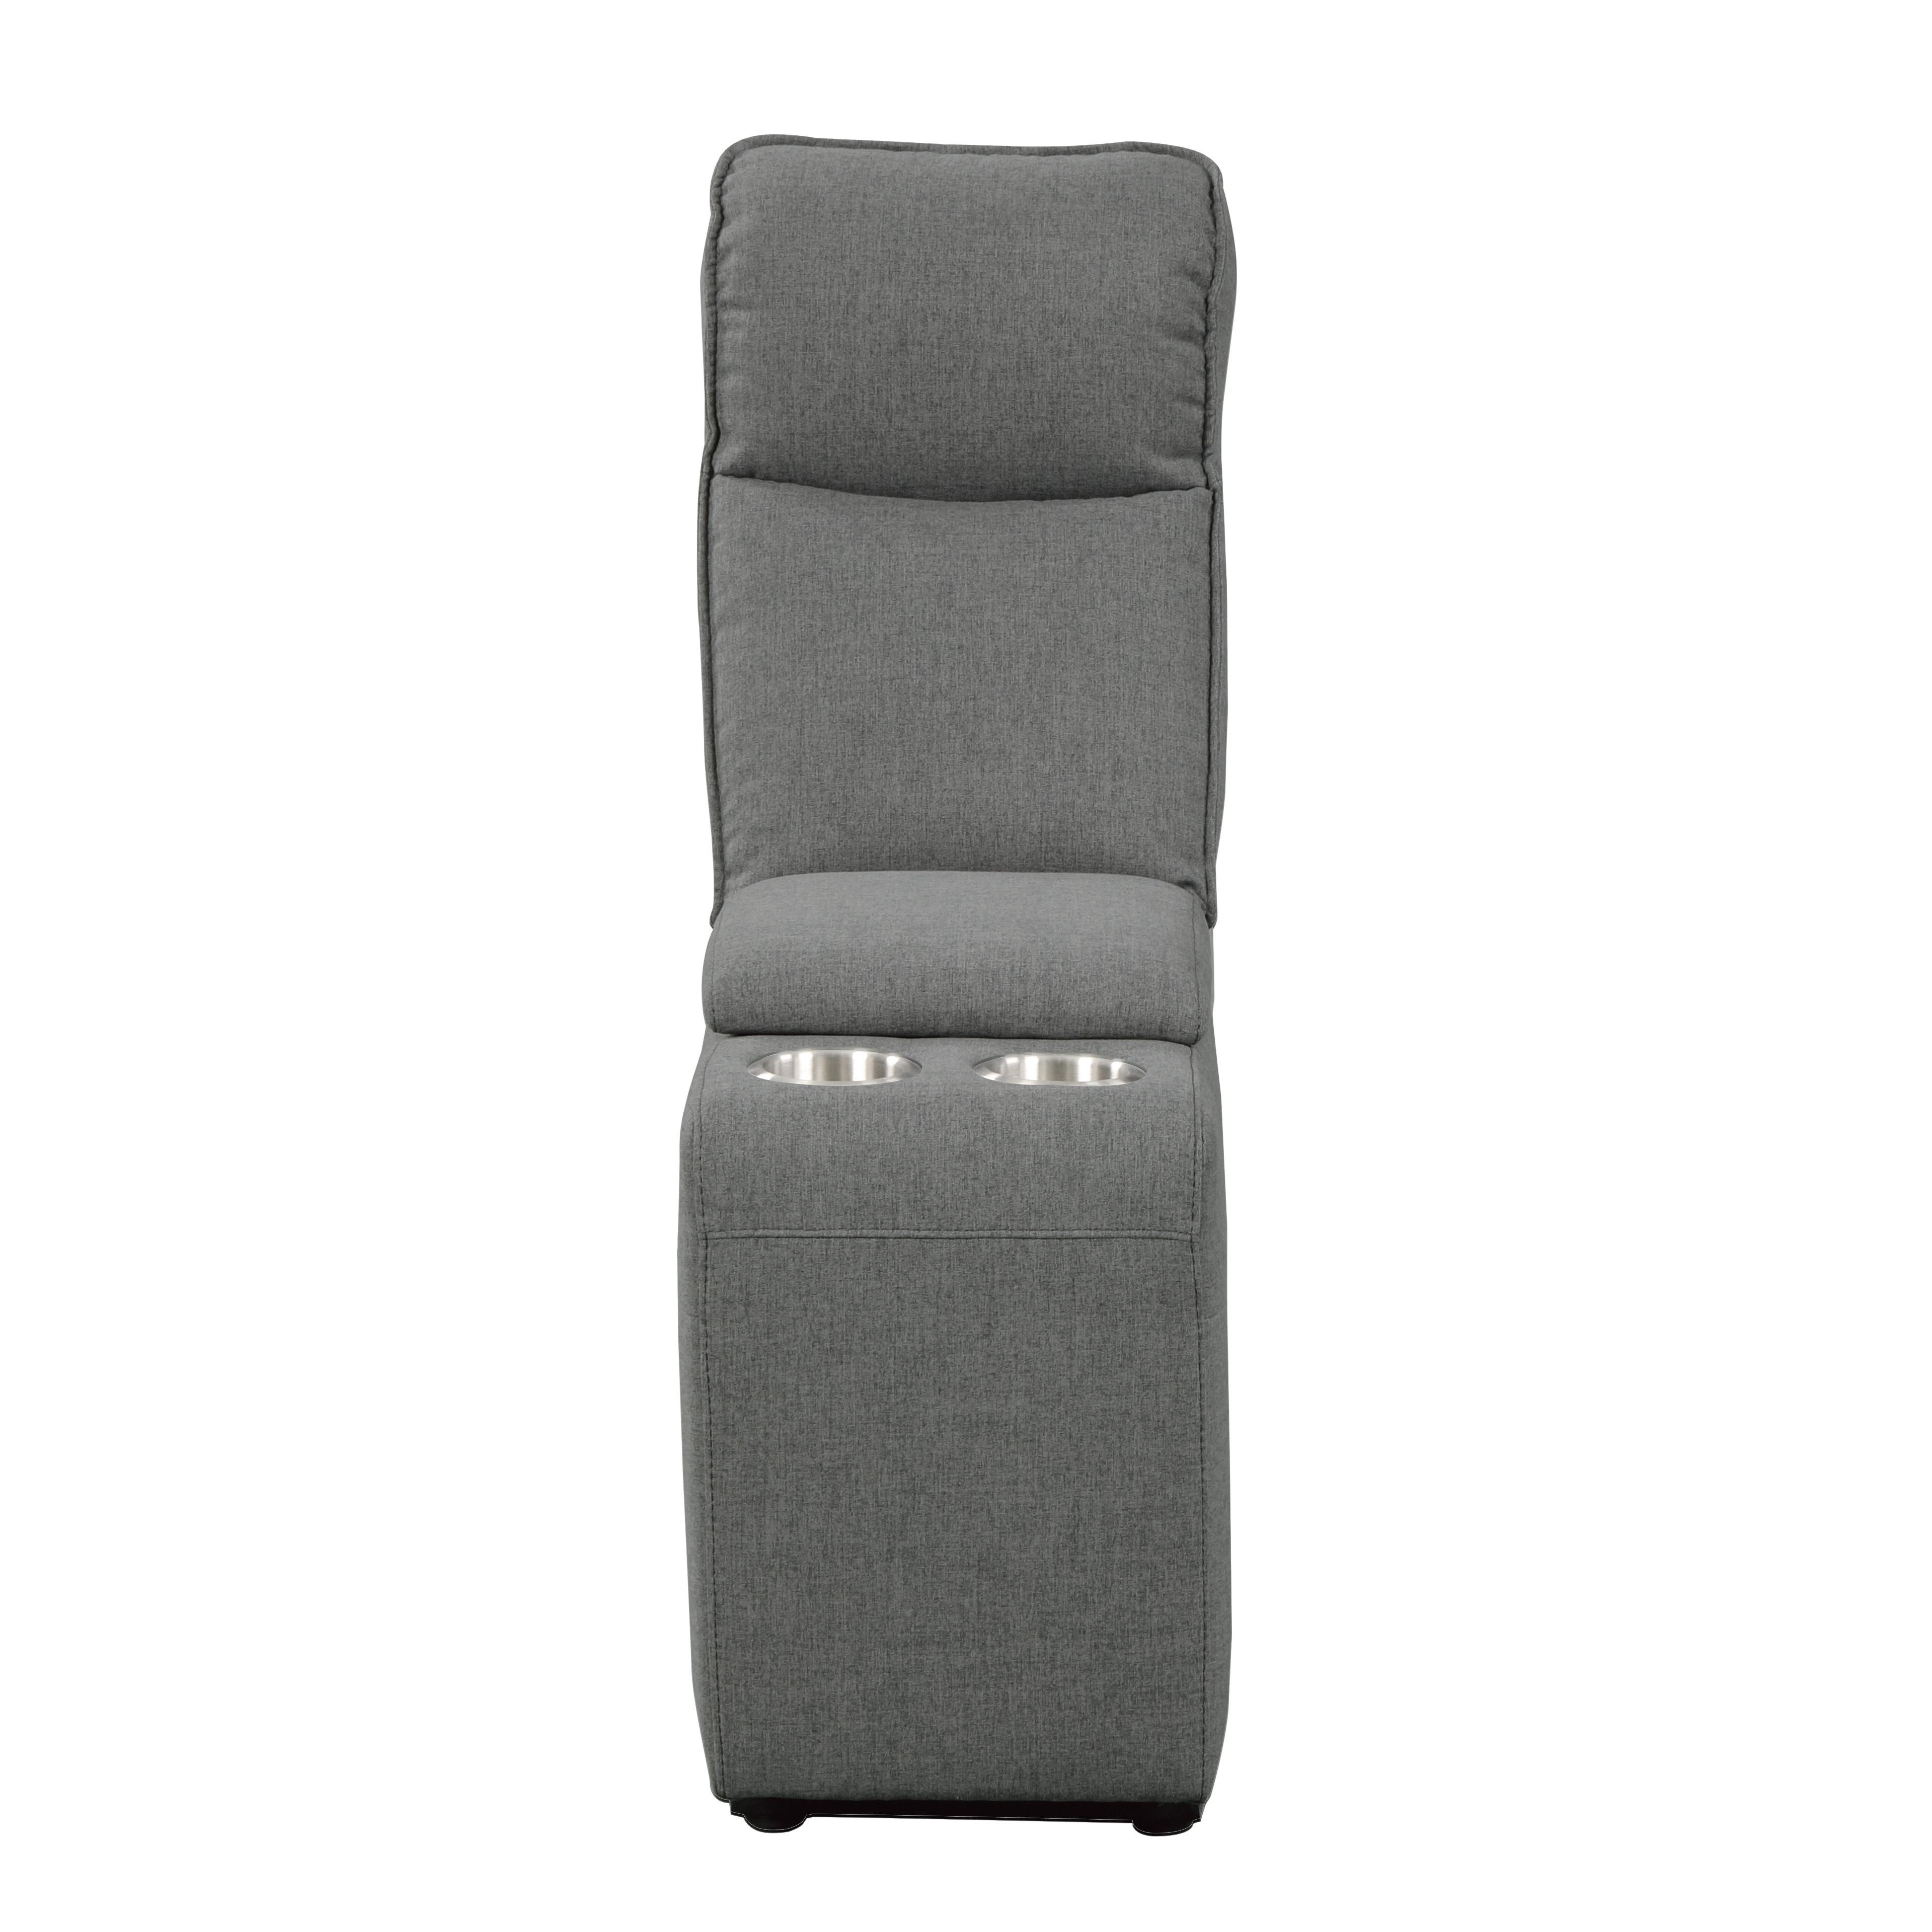 

                    
Homelegance 8259DG*6SCPWH Maroni Power Reclining Sectional Dark Gray Textured Purchase 
